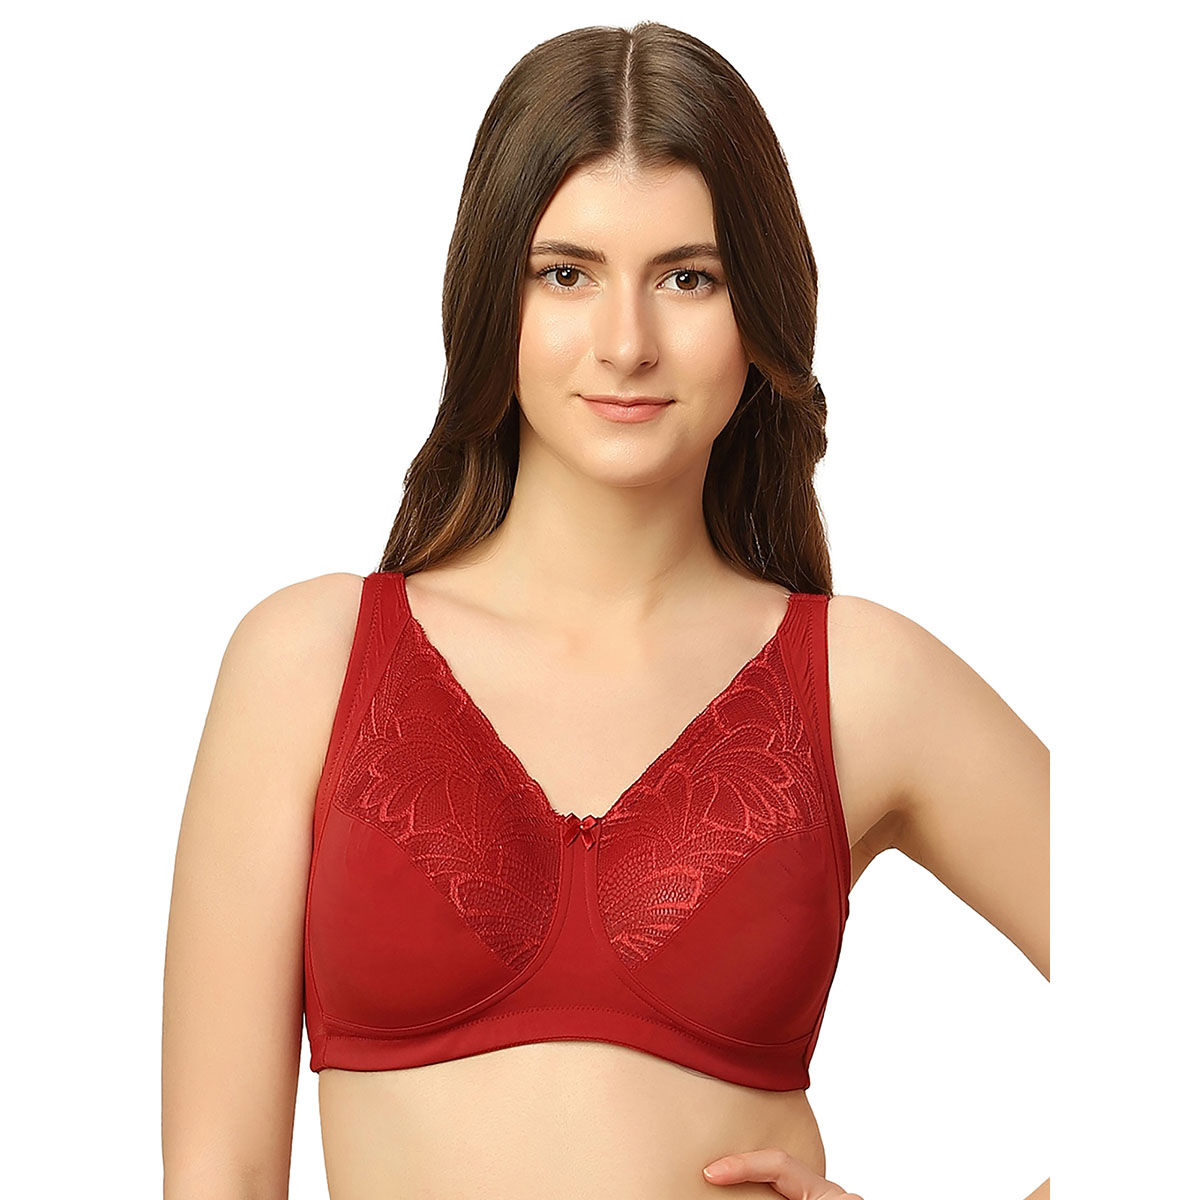  Womens Balconette Bra Plus Size Full Coverage Tshirt Seamless  Underwire Bras Back Smoothing Red Revelry 44C